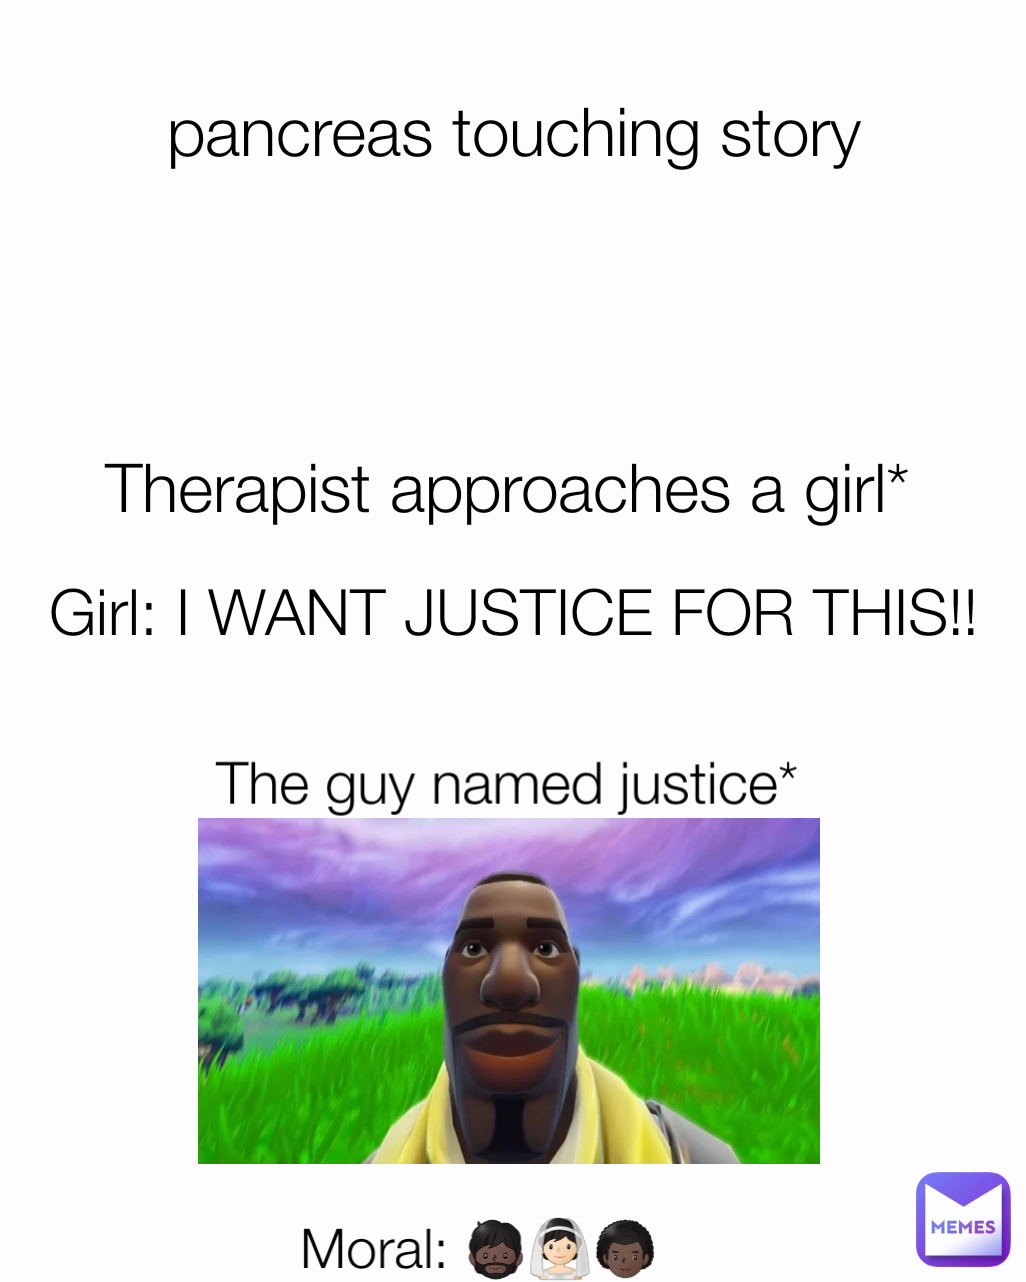 pancreas touching story Therapist approaches a girl* Moral: 🧔🏿‍♂️👰🏻👨🏿‍🦱 Girl: I WANT JUSTICE FOR THIS!! The guy named justice*